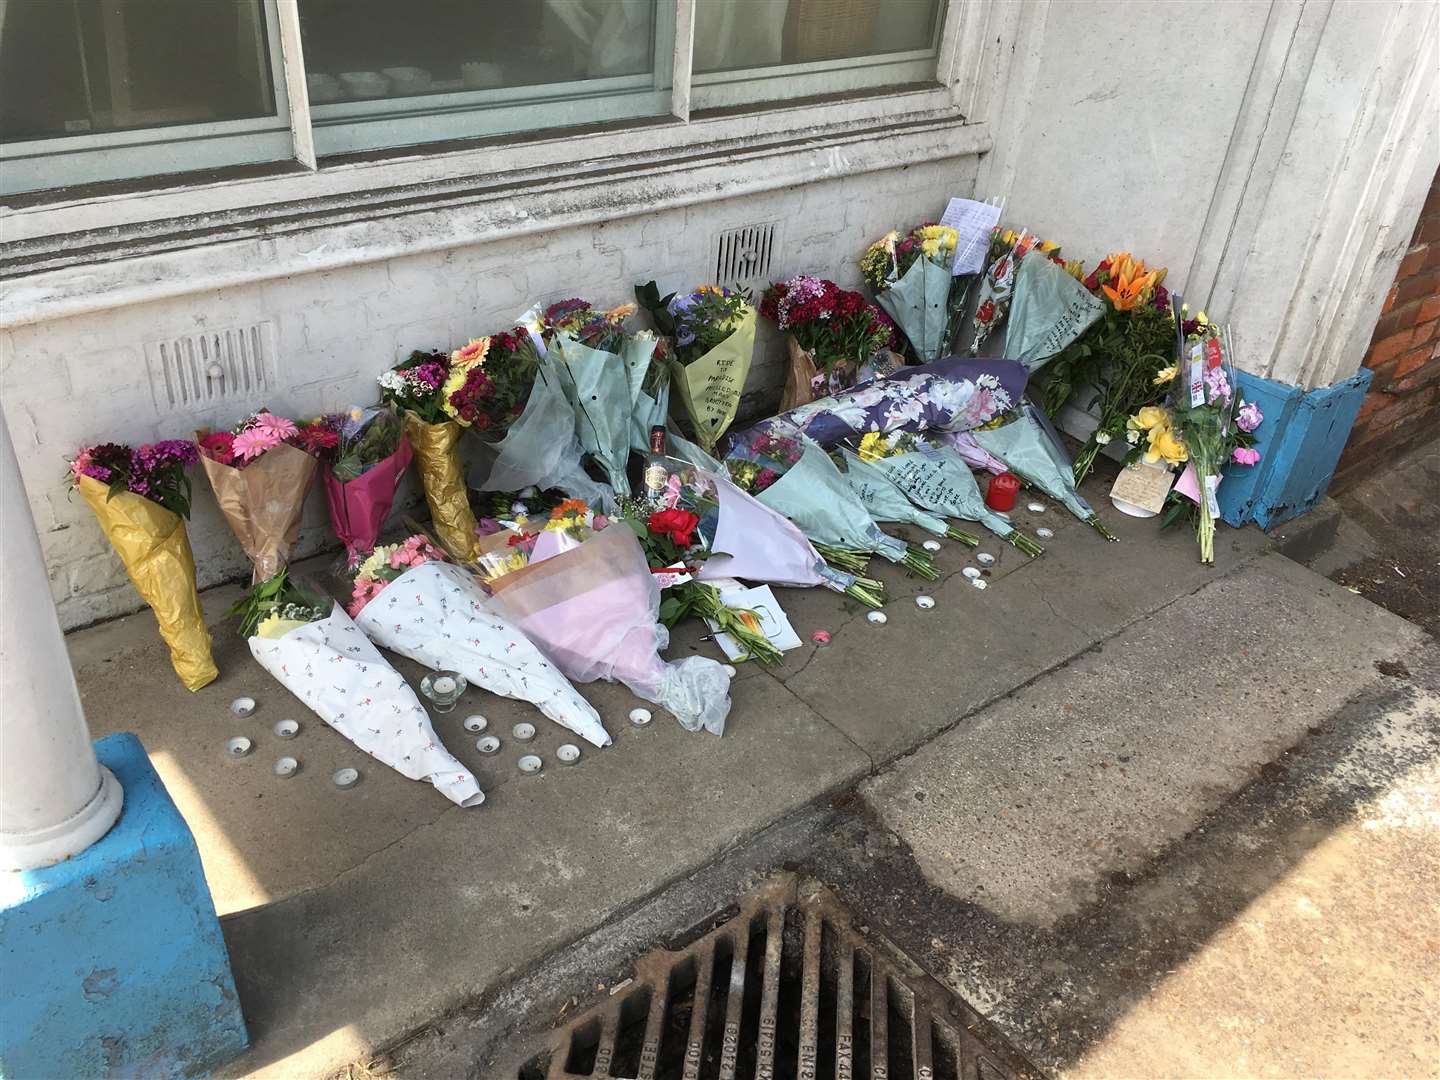 Floral tributes were left in Wateringbury for 21-year-old Ellis Overy who died in a motorcycle crash